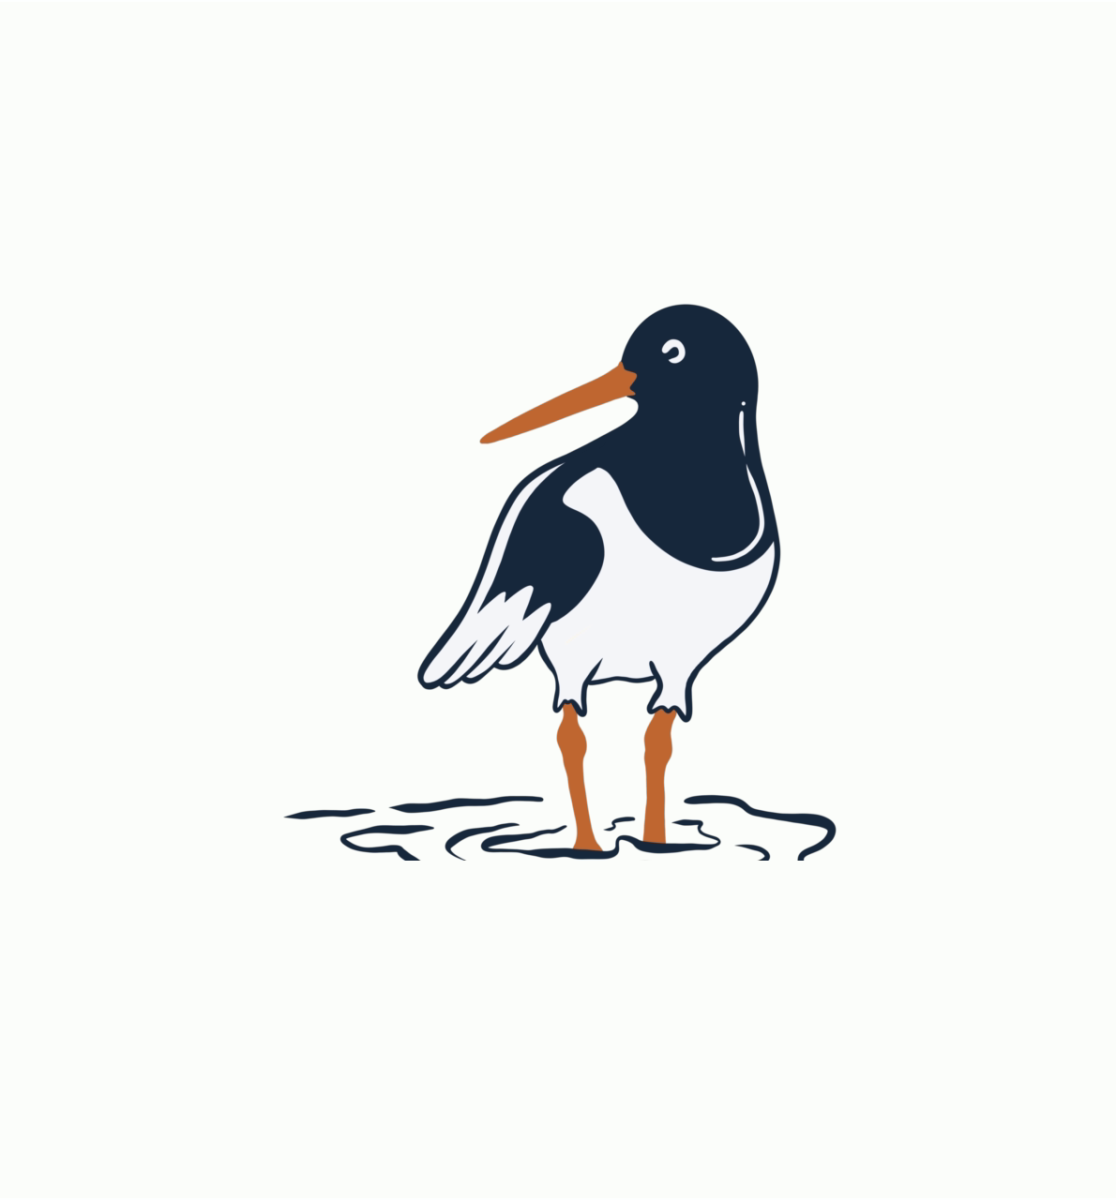 Drawing of an oystercatcher on a white background